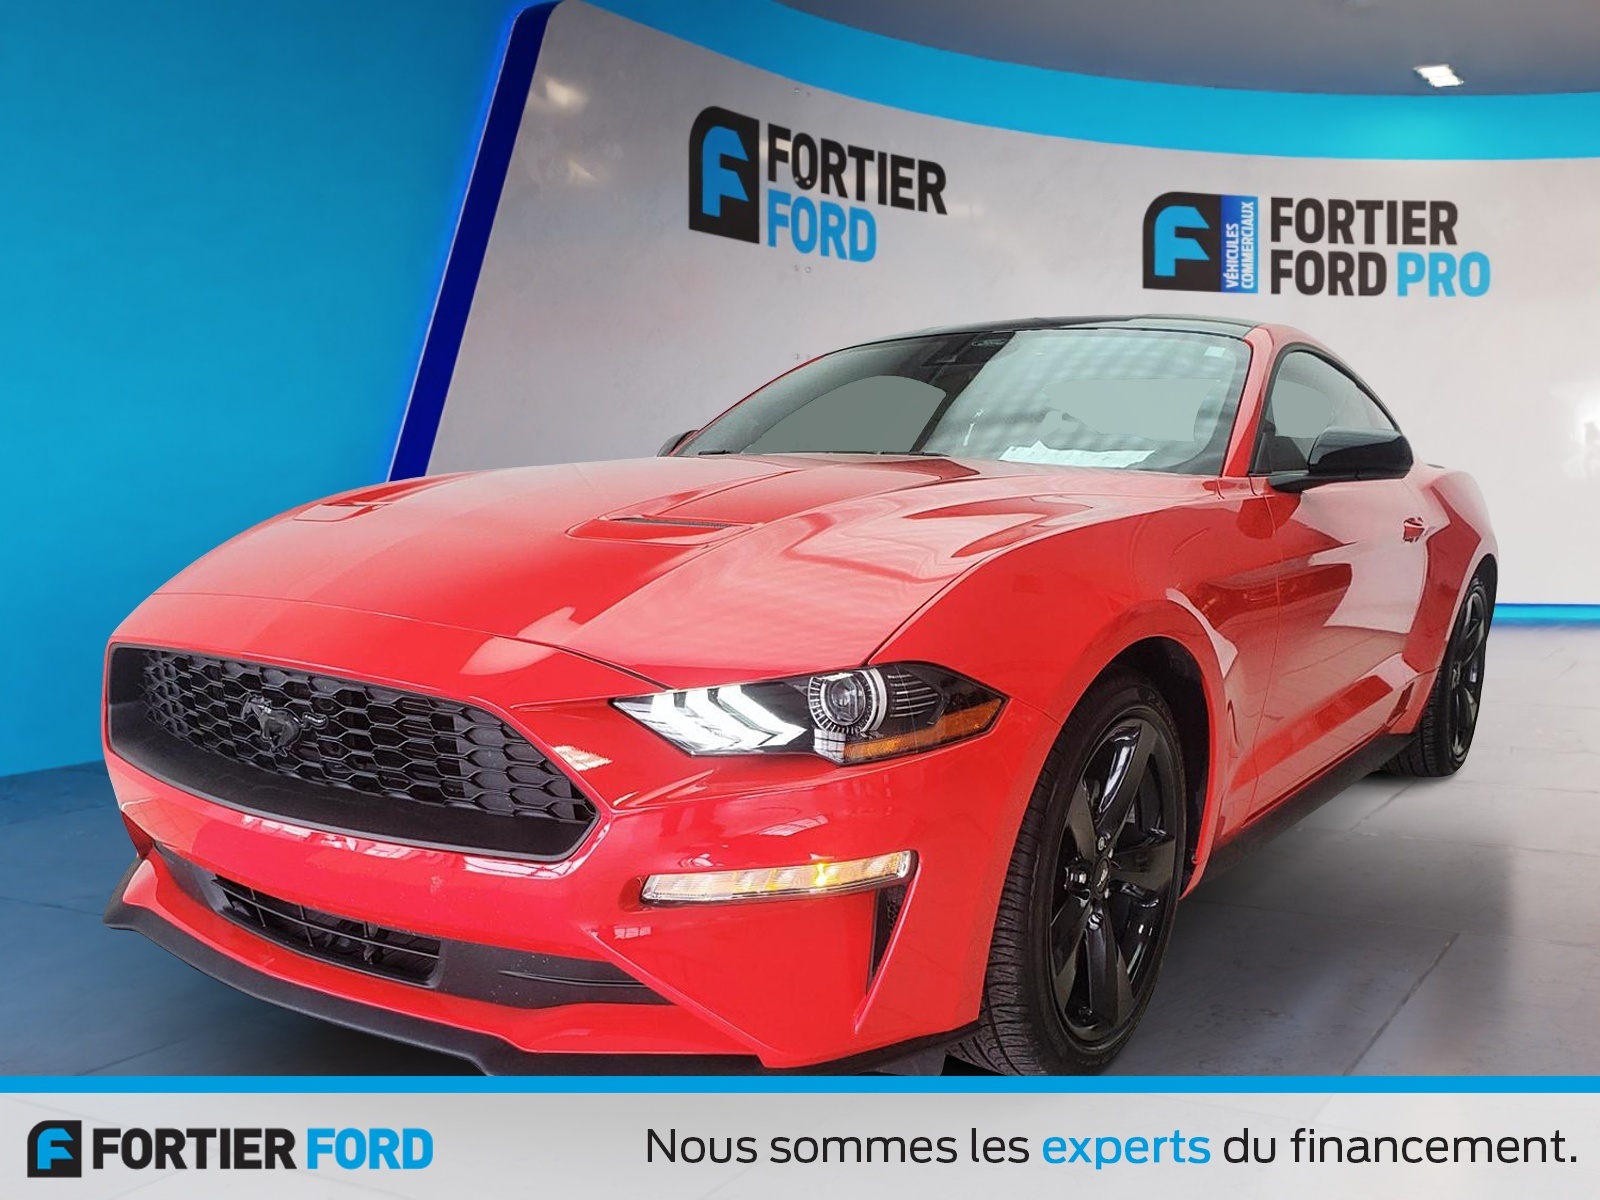 2021 Ford Mustang ECOBOOST 310HP 101ANAVIGATION ENSEMBLE NOIR